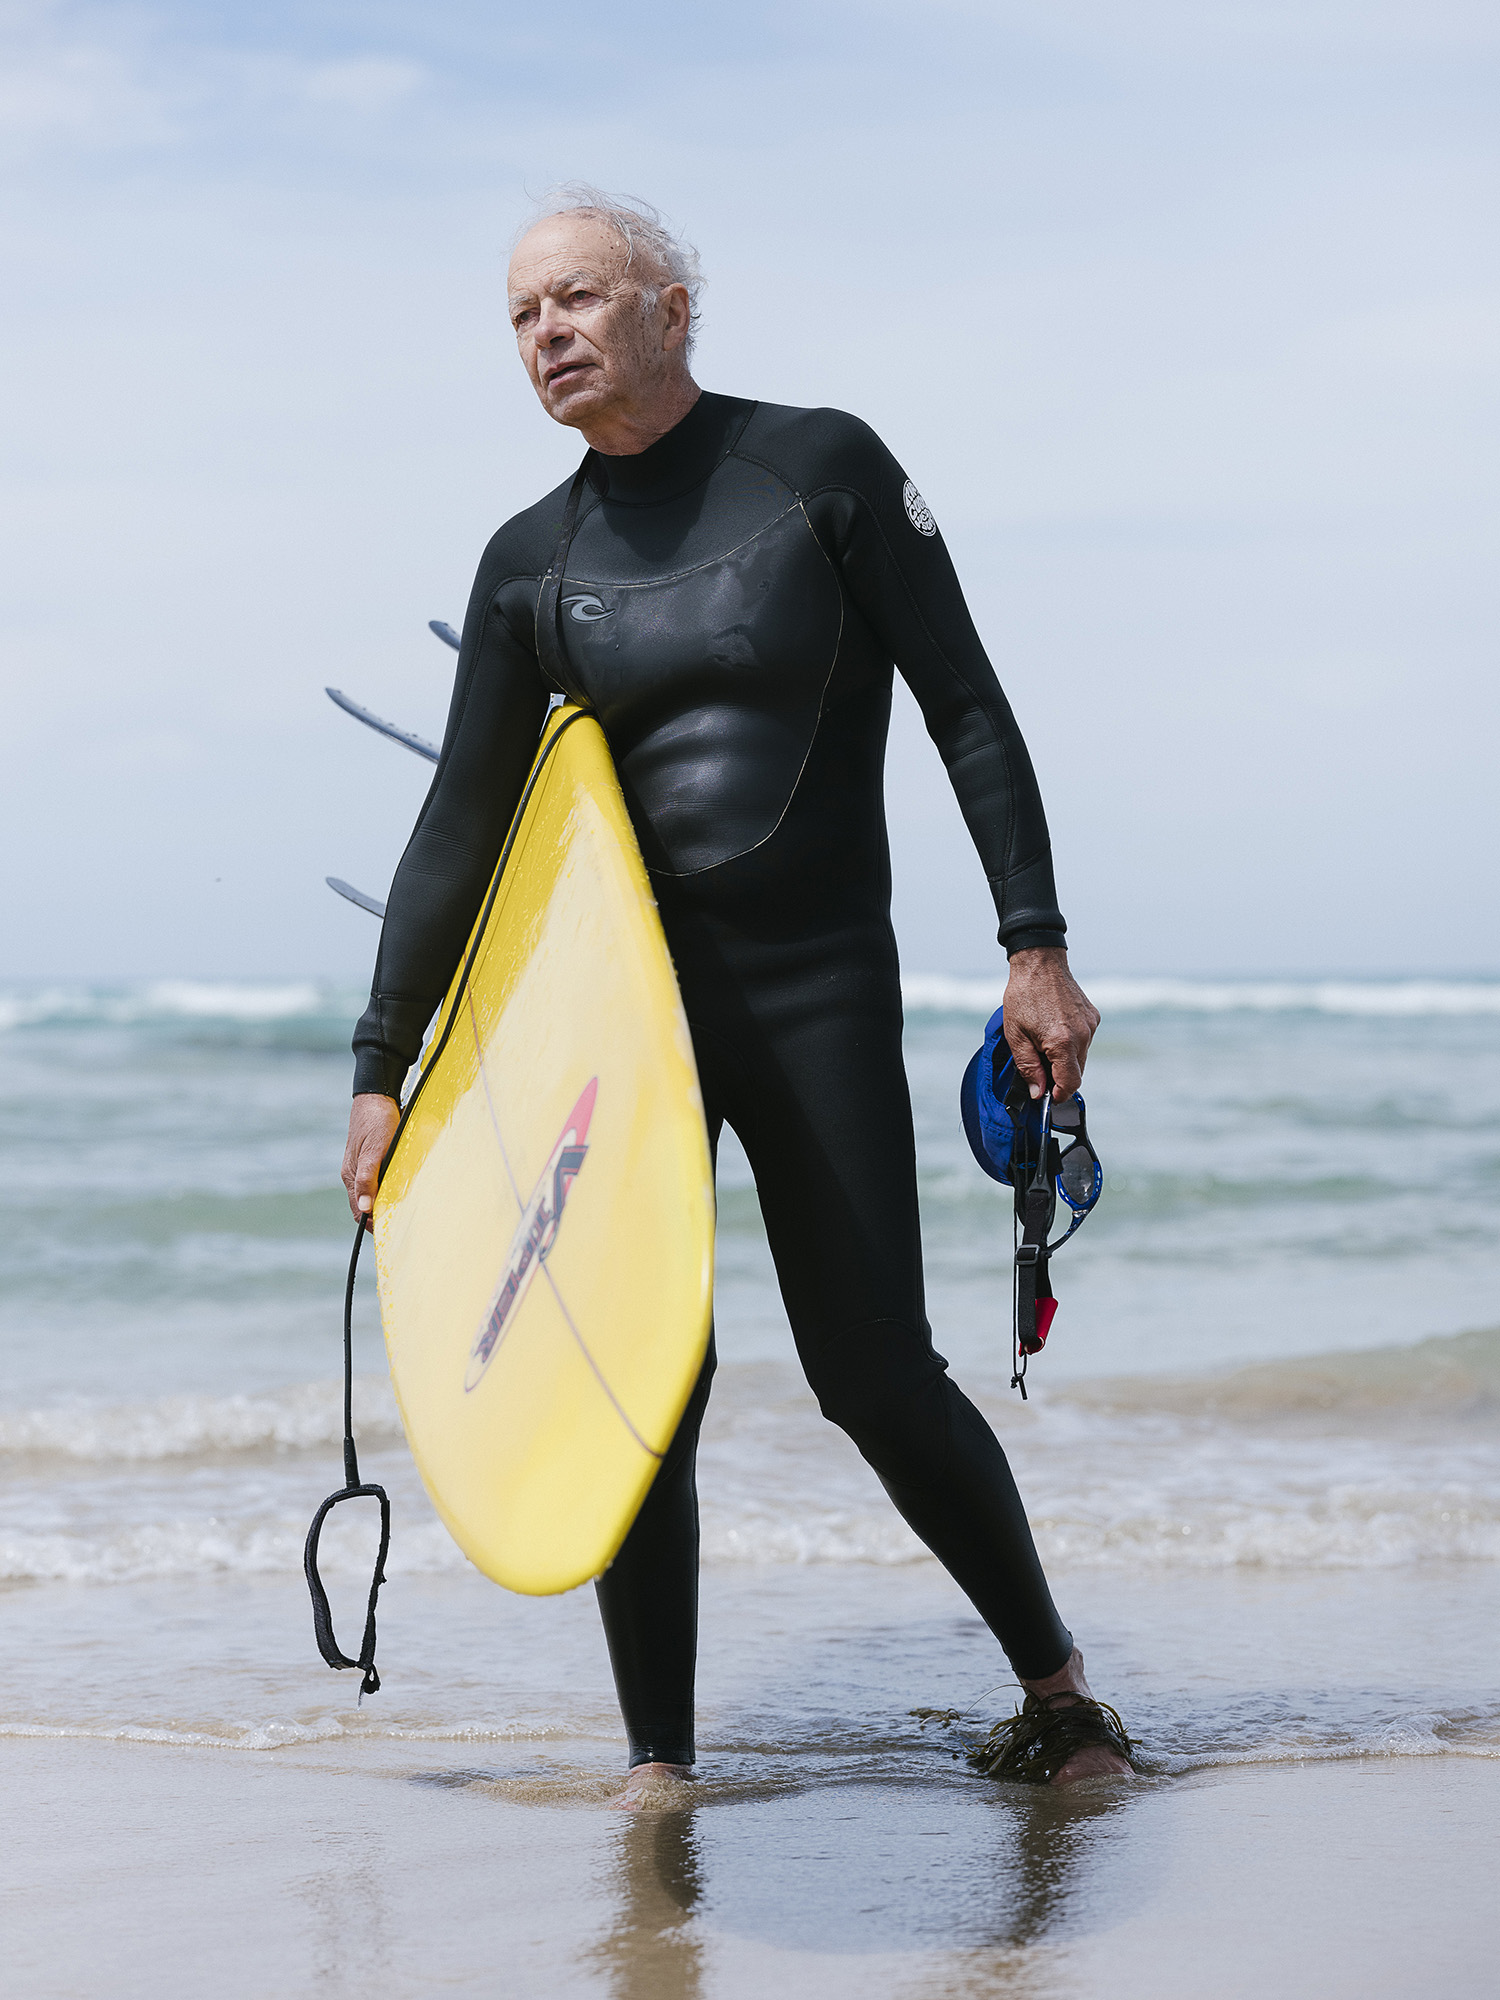 Peter Singer wears a wetsuit while standing on a beach, holding a surfboard.